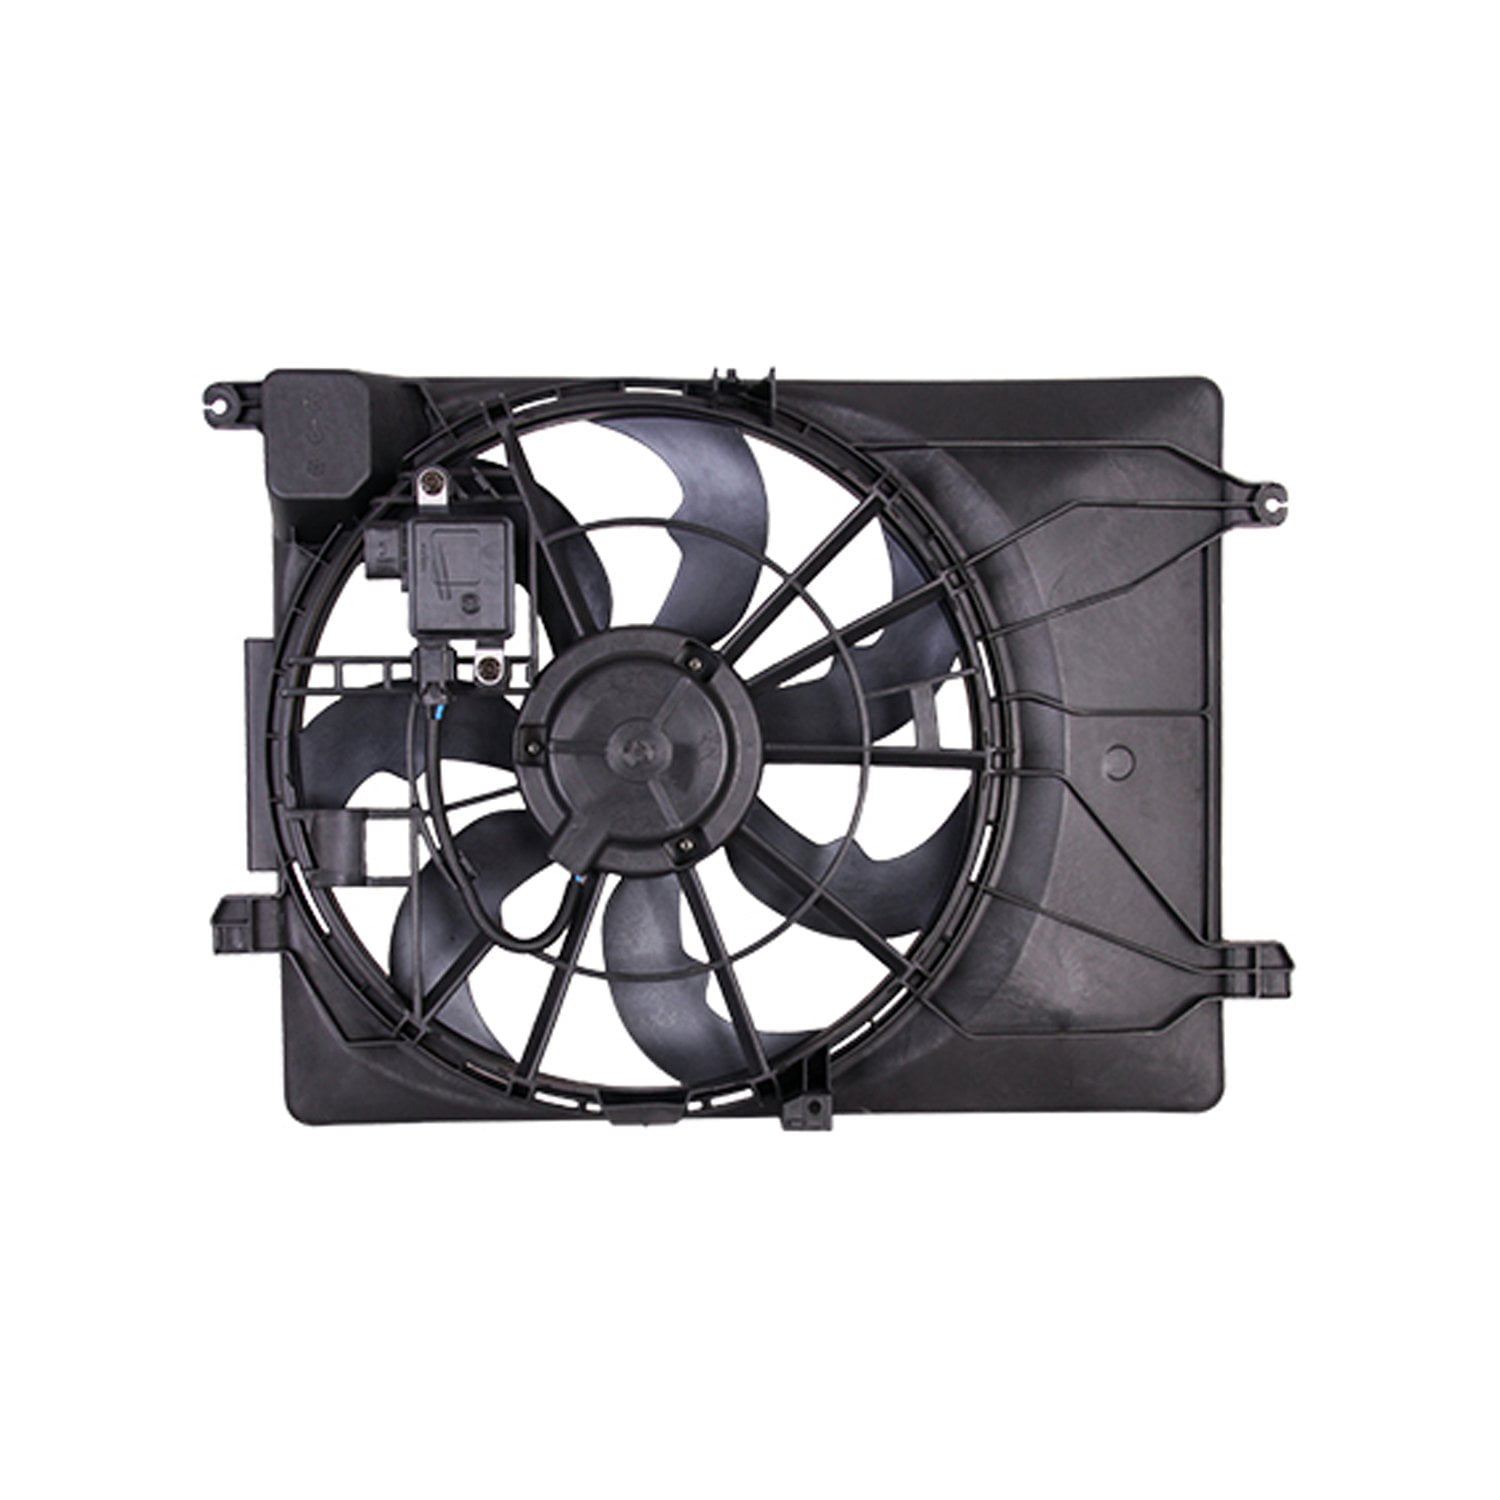 GO-PARTS Replacement for 2016 - 2021 Hyundai Tucson Radiator Cooling Fan  Assembly 25380-D3600 HY3115155 Replacement For Hyundai Tucson